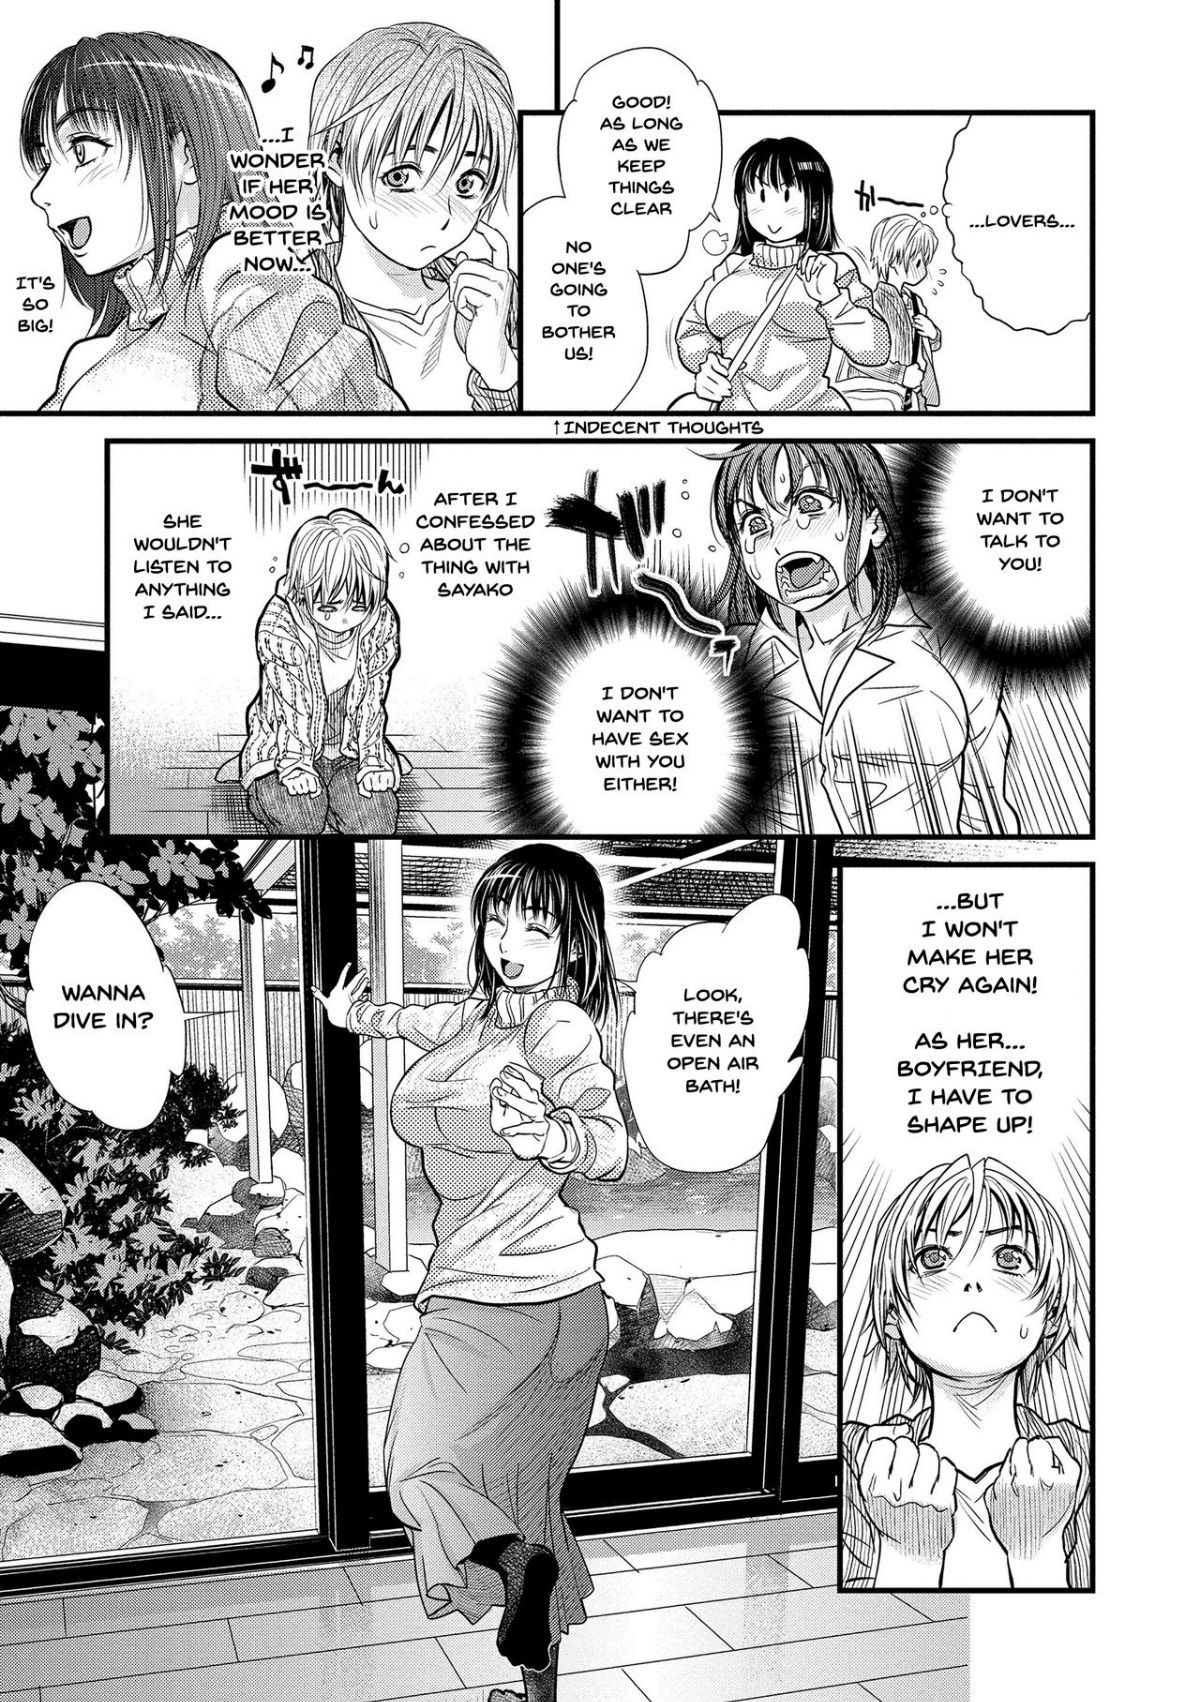 Together With My Older Cousin part 3 Hentai english 02